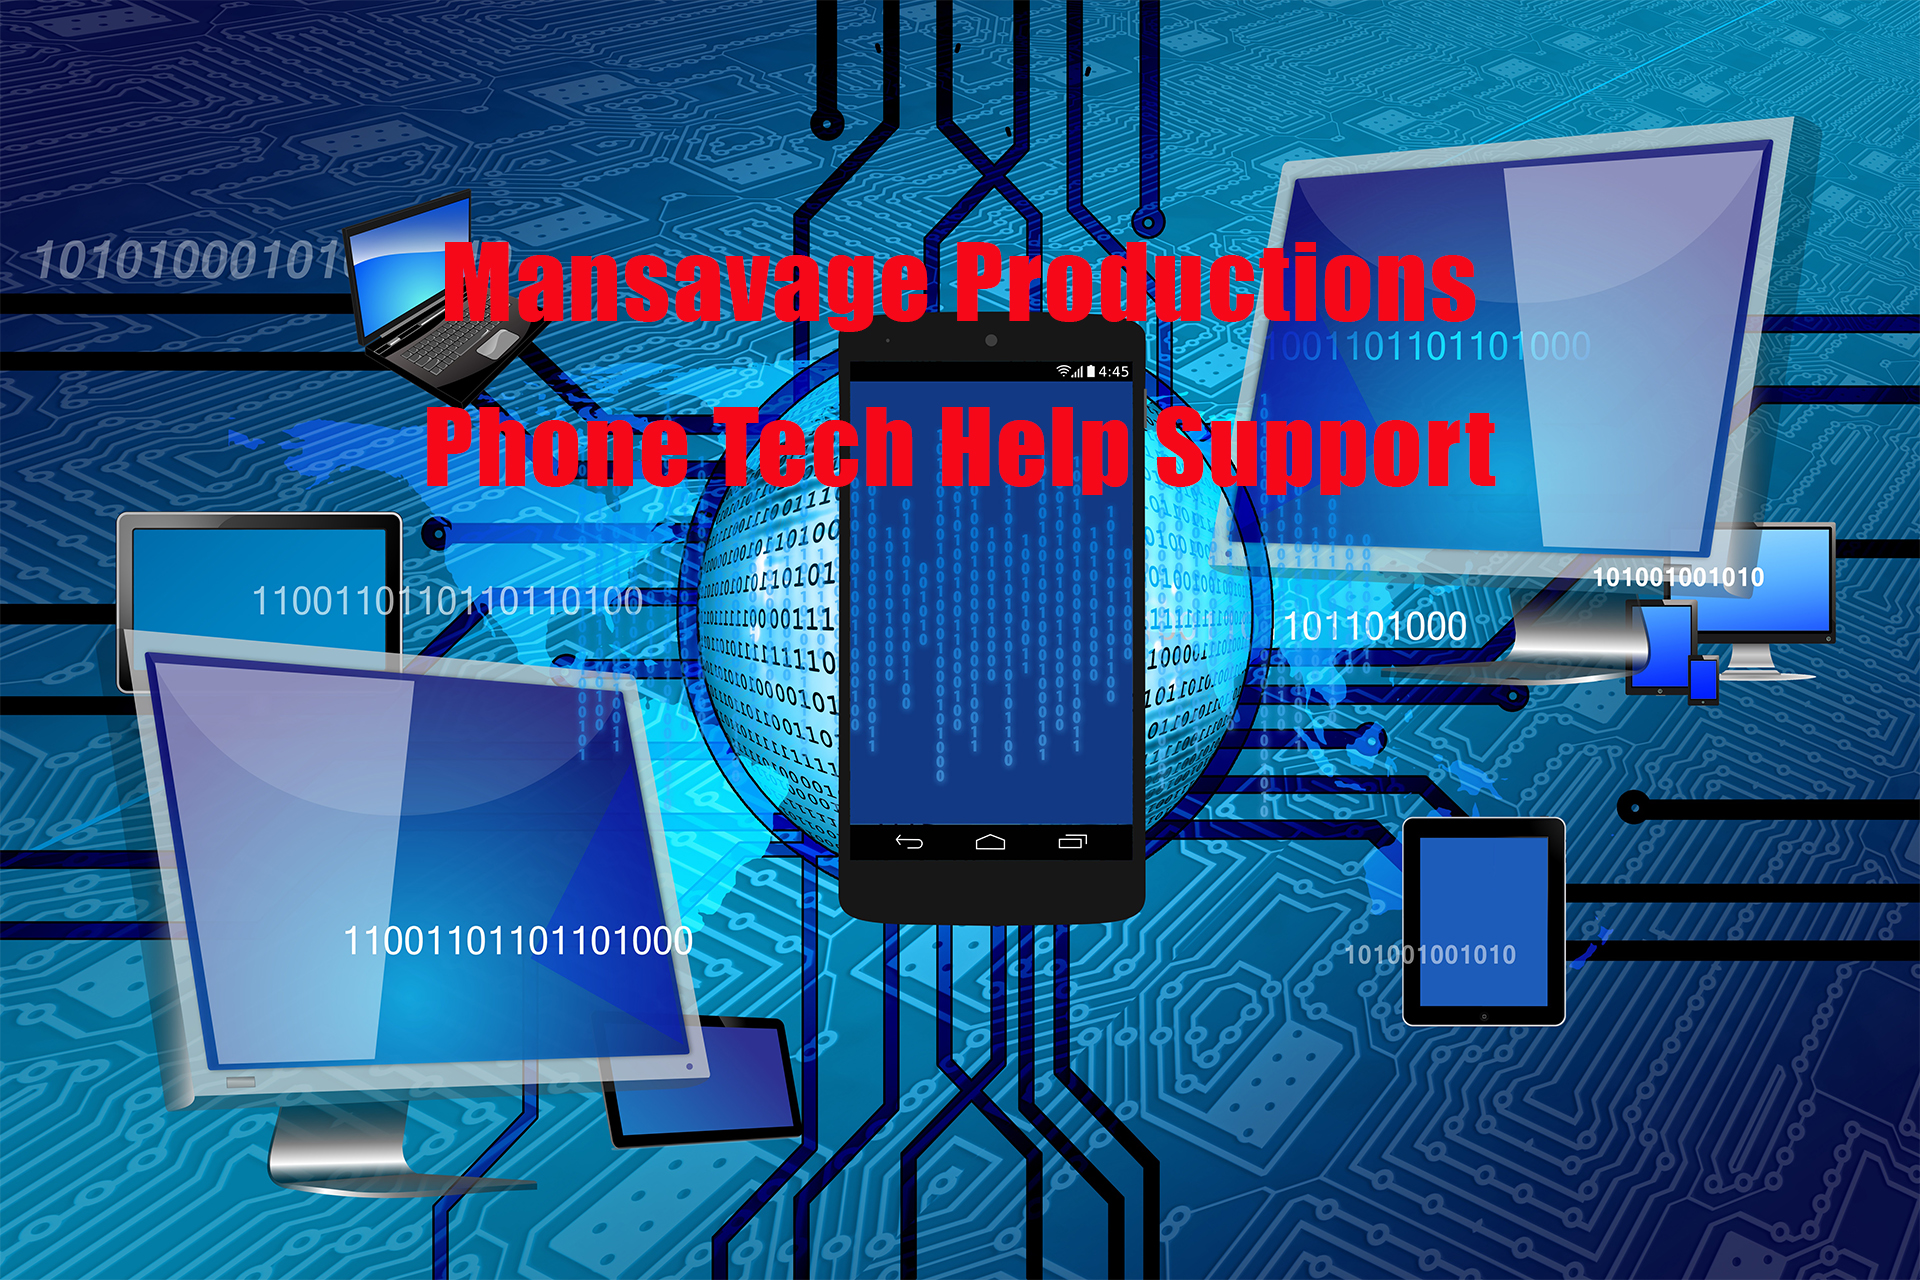 Mansavage Productions Phone Tech Help Support.